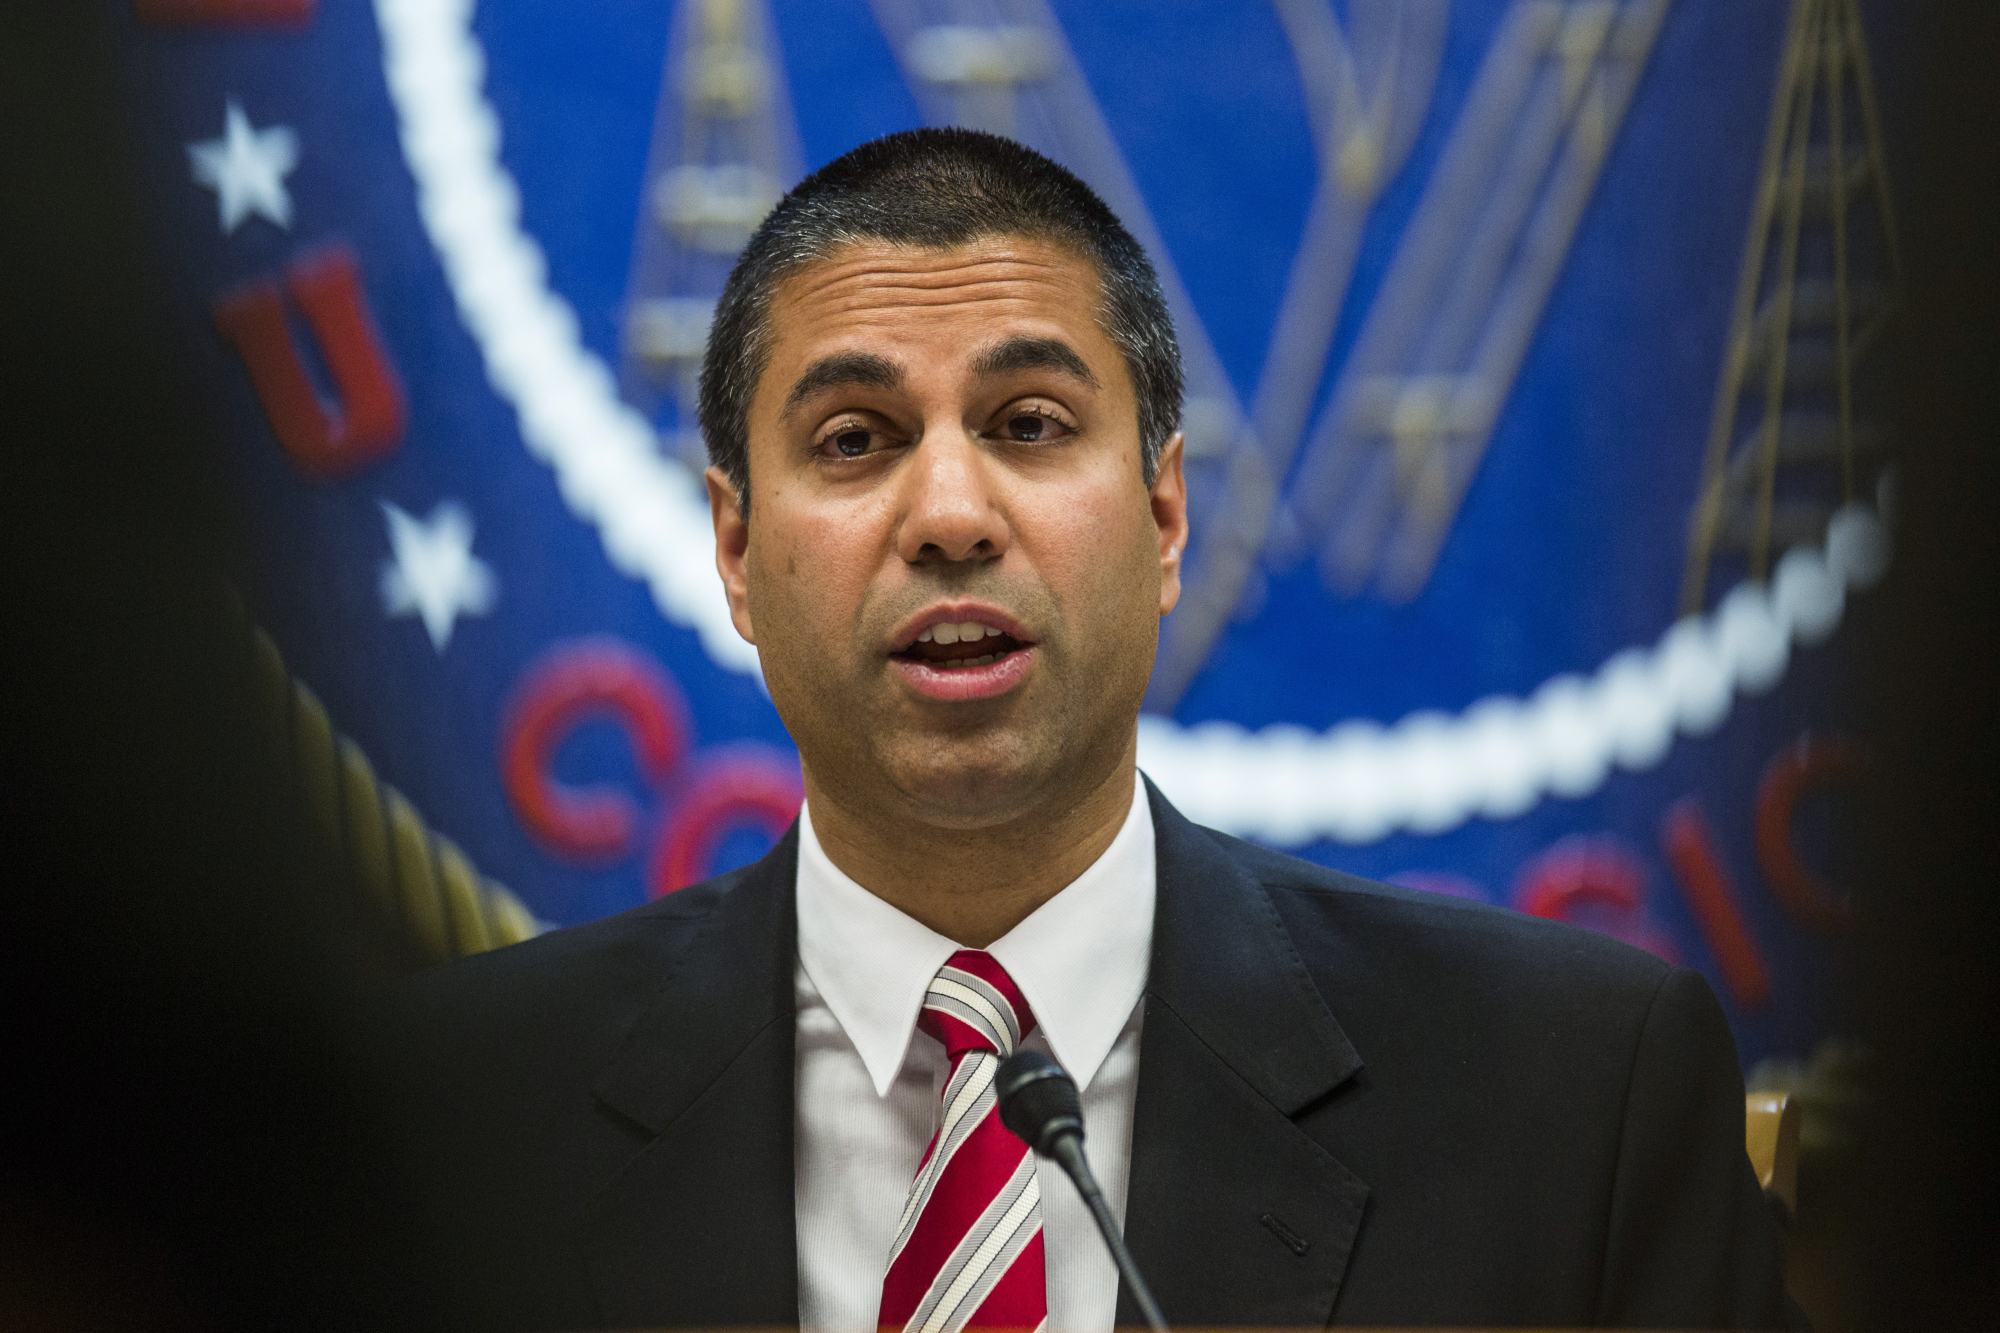 FCC Chairman Ajit Pai this week proposed a plan to eliminate Obama-era 'net neutrality' regulations aimed at compelling internet service providers to keep their networks open to all comers. | BLOOMBERG